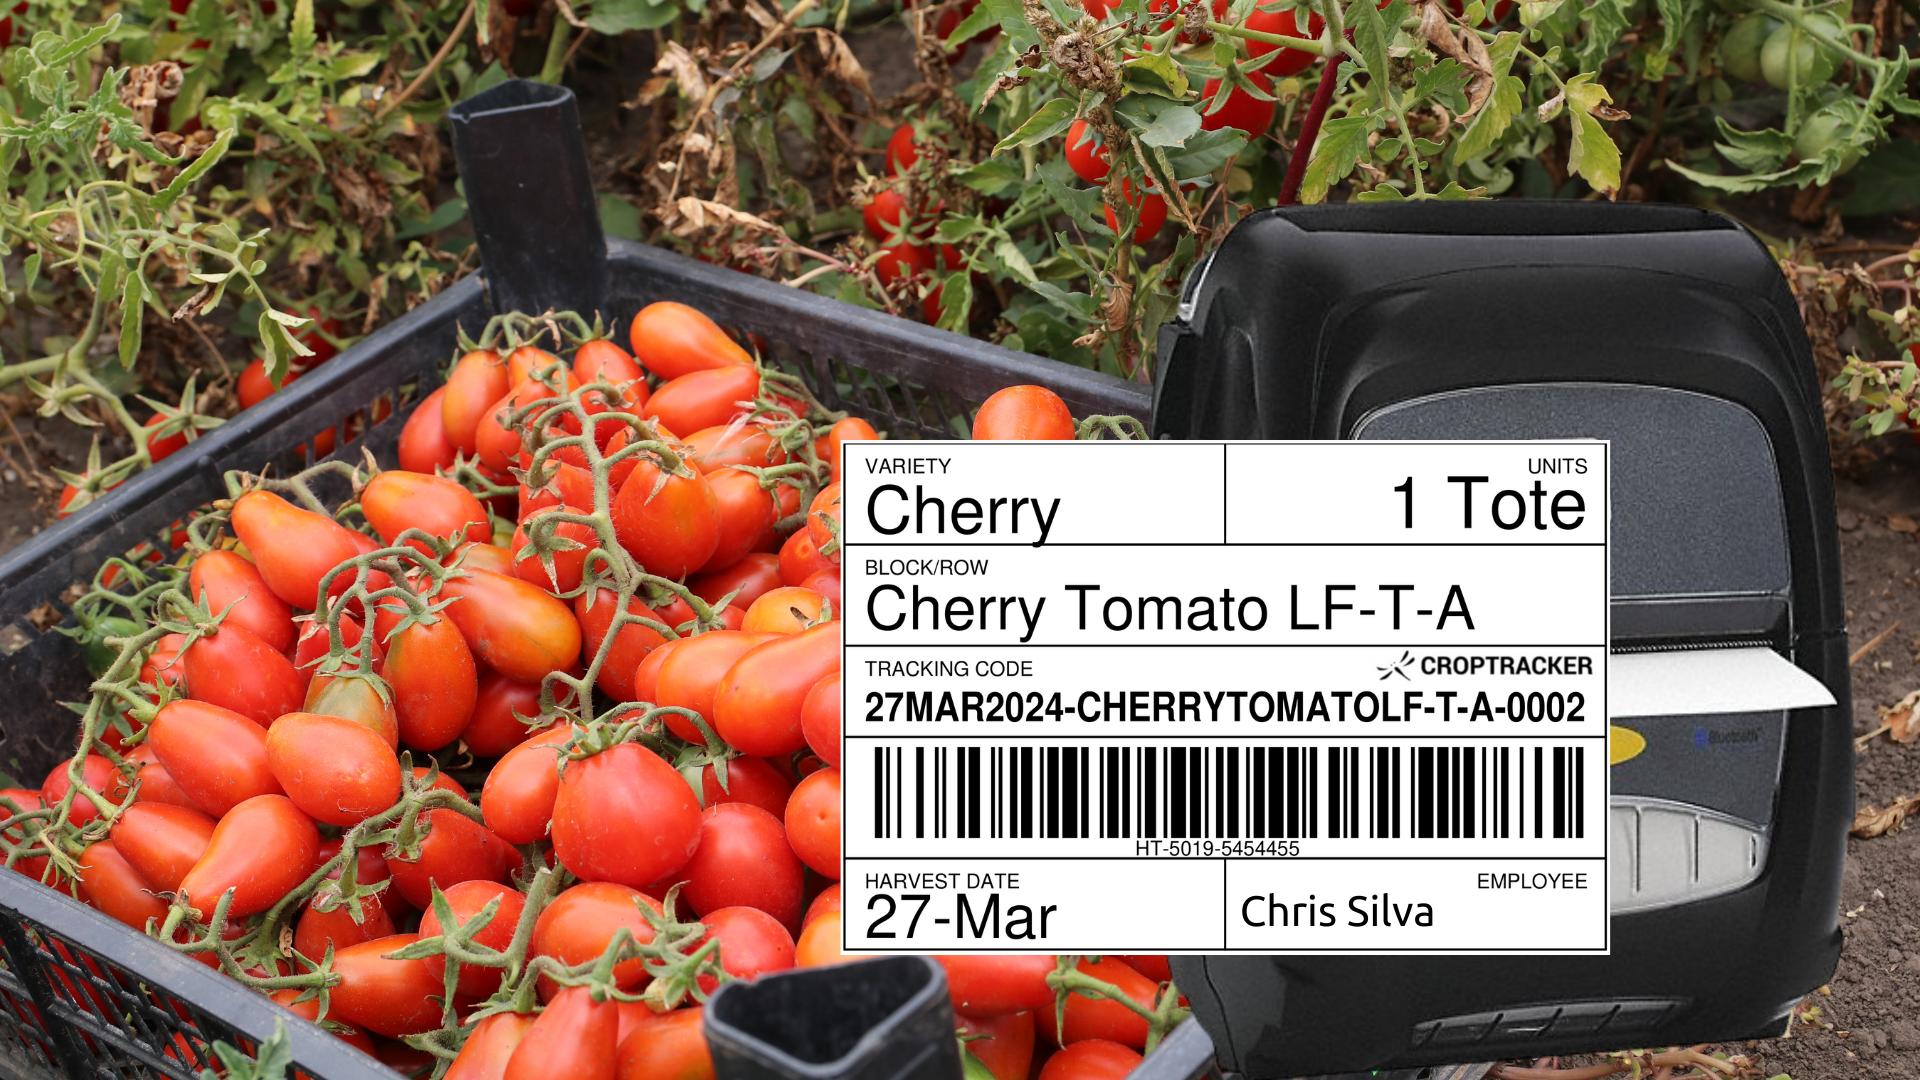 example of a croptracker label in tomato harvest